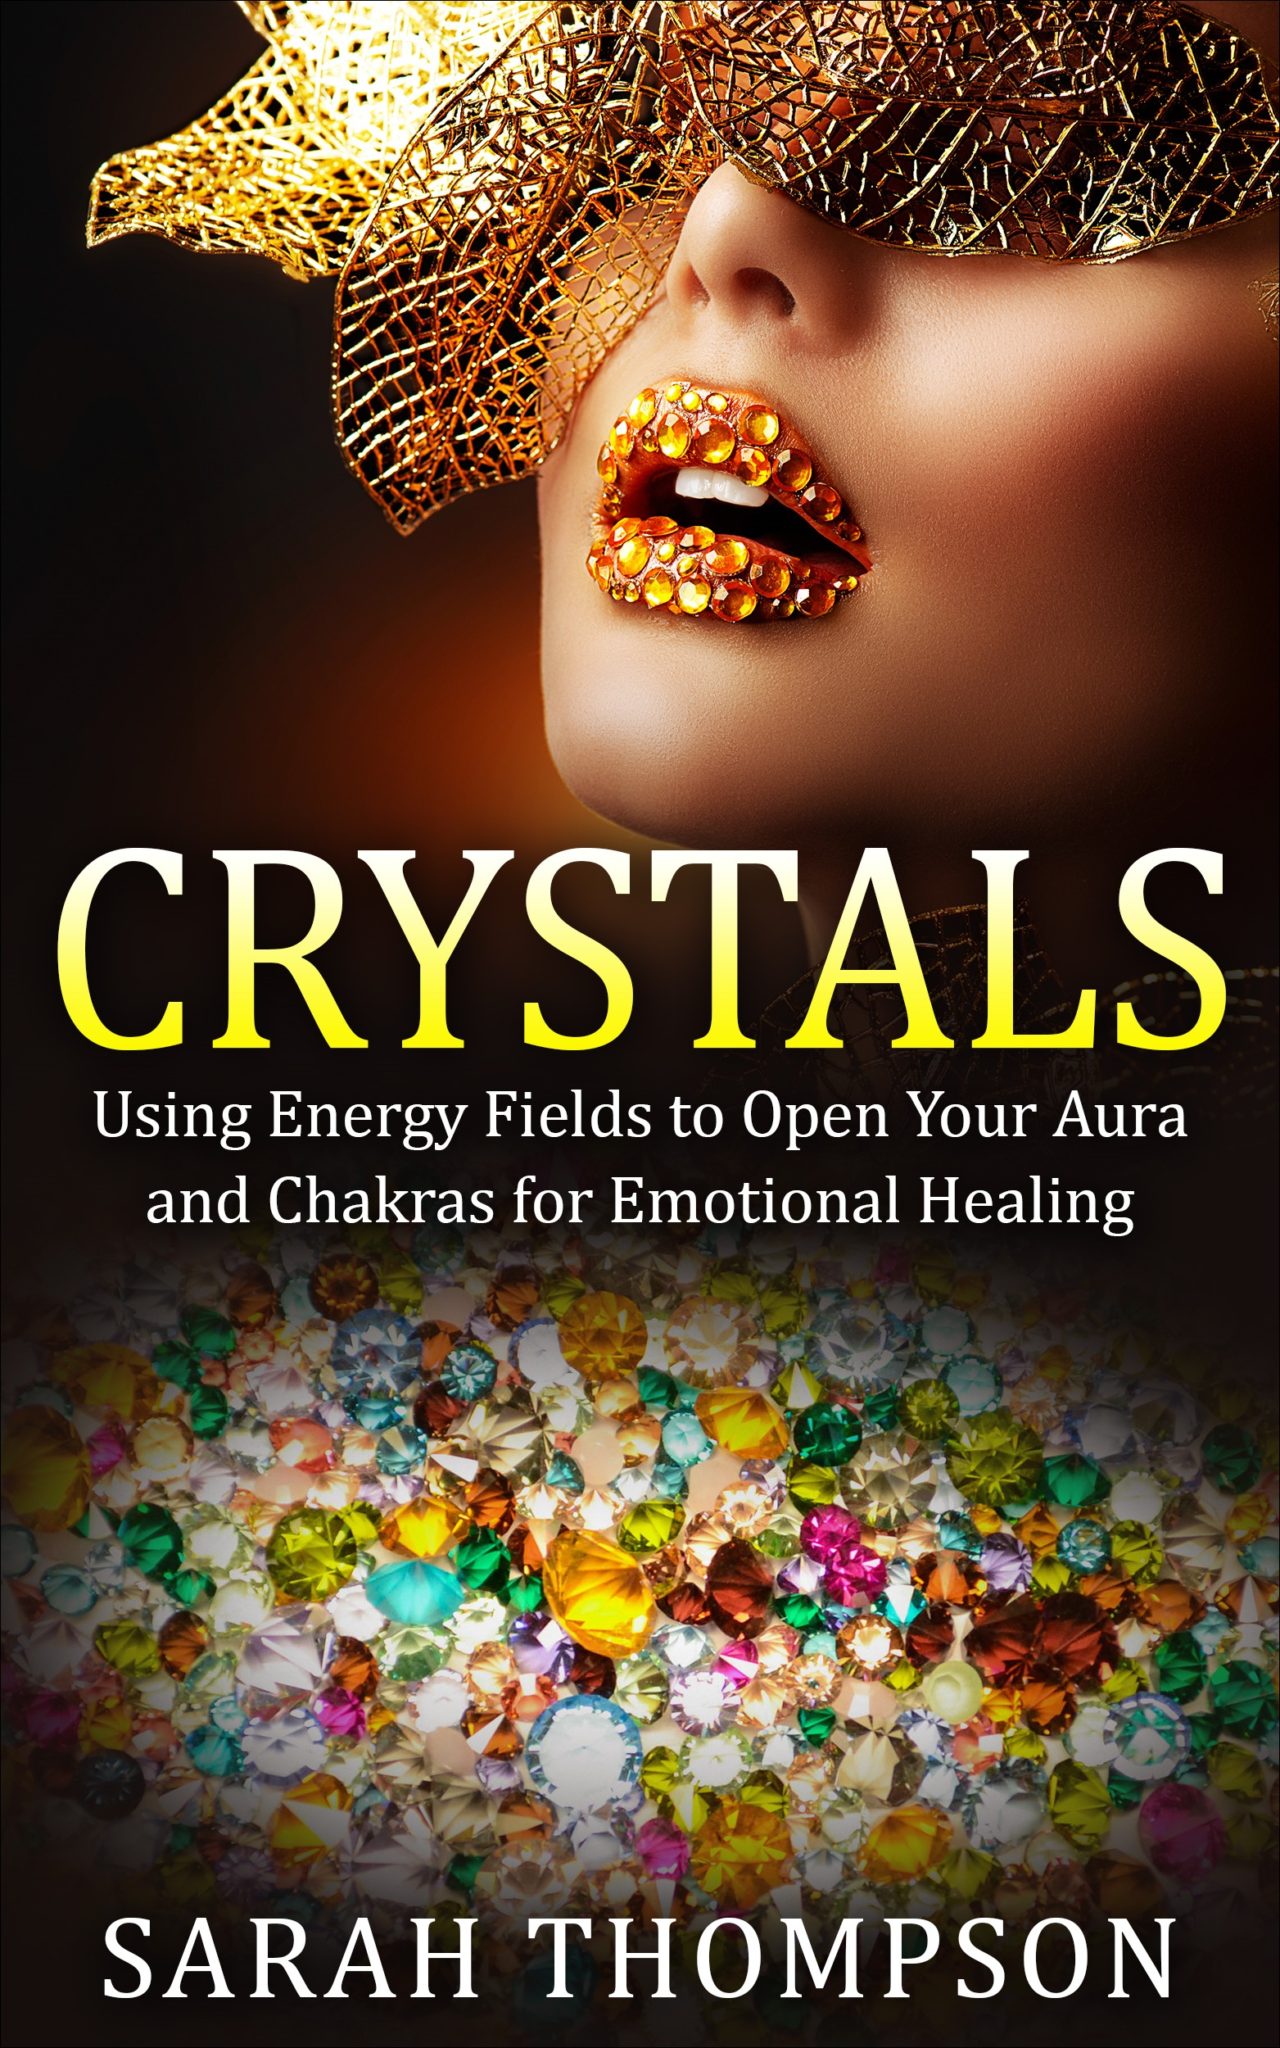 FREE: Crystals: Using Energy Fields to Open Your Aura and Chakras for Emotional Healing (Aura, Healing Stones, Crystal Energy, Crystal Healing, Energy Fields, Emotional Healing, Gemstone) by Sarah Thompson